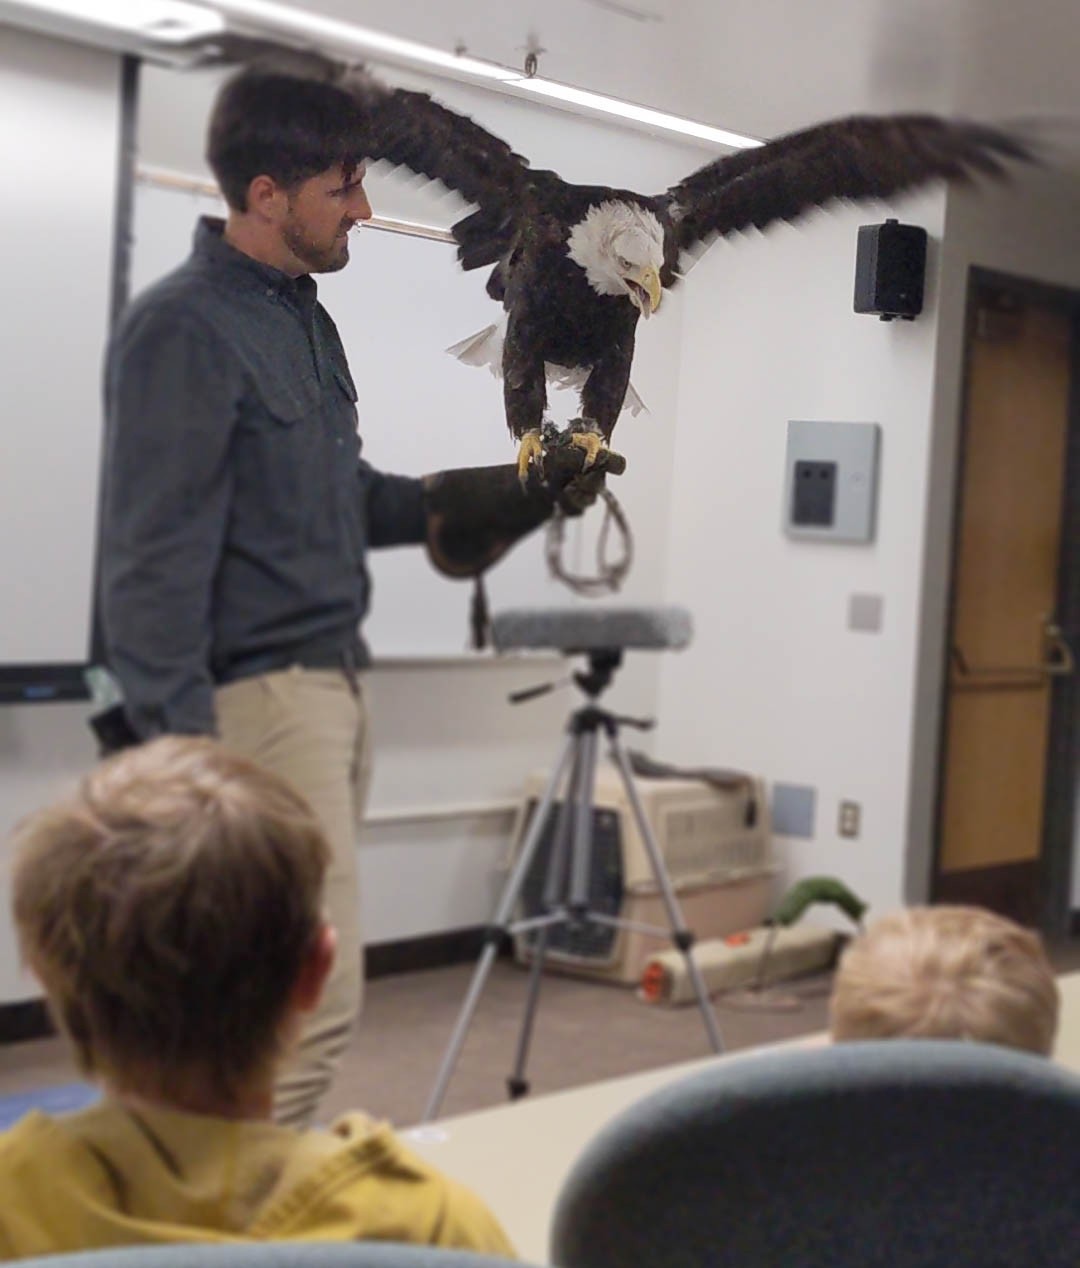 A bald eagle flaps its wings while perched on a gloved hand in a USU classroom.